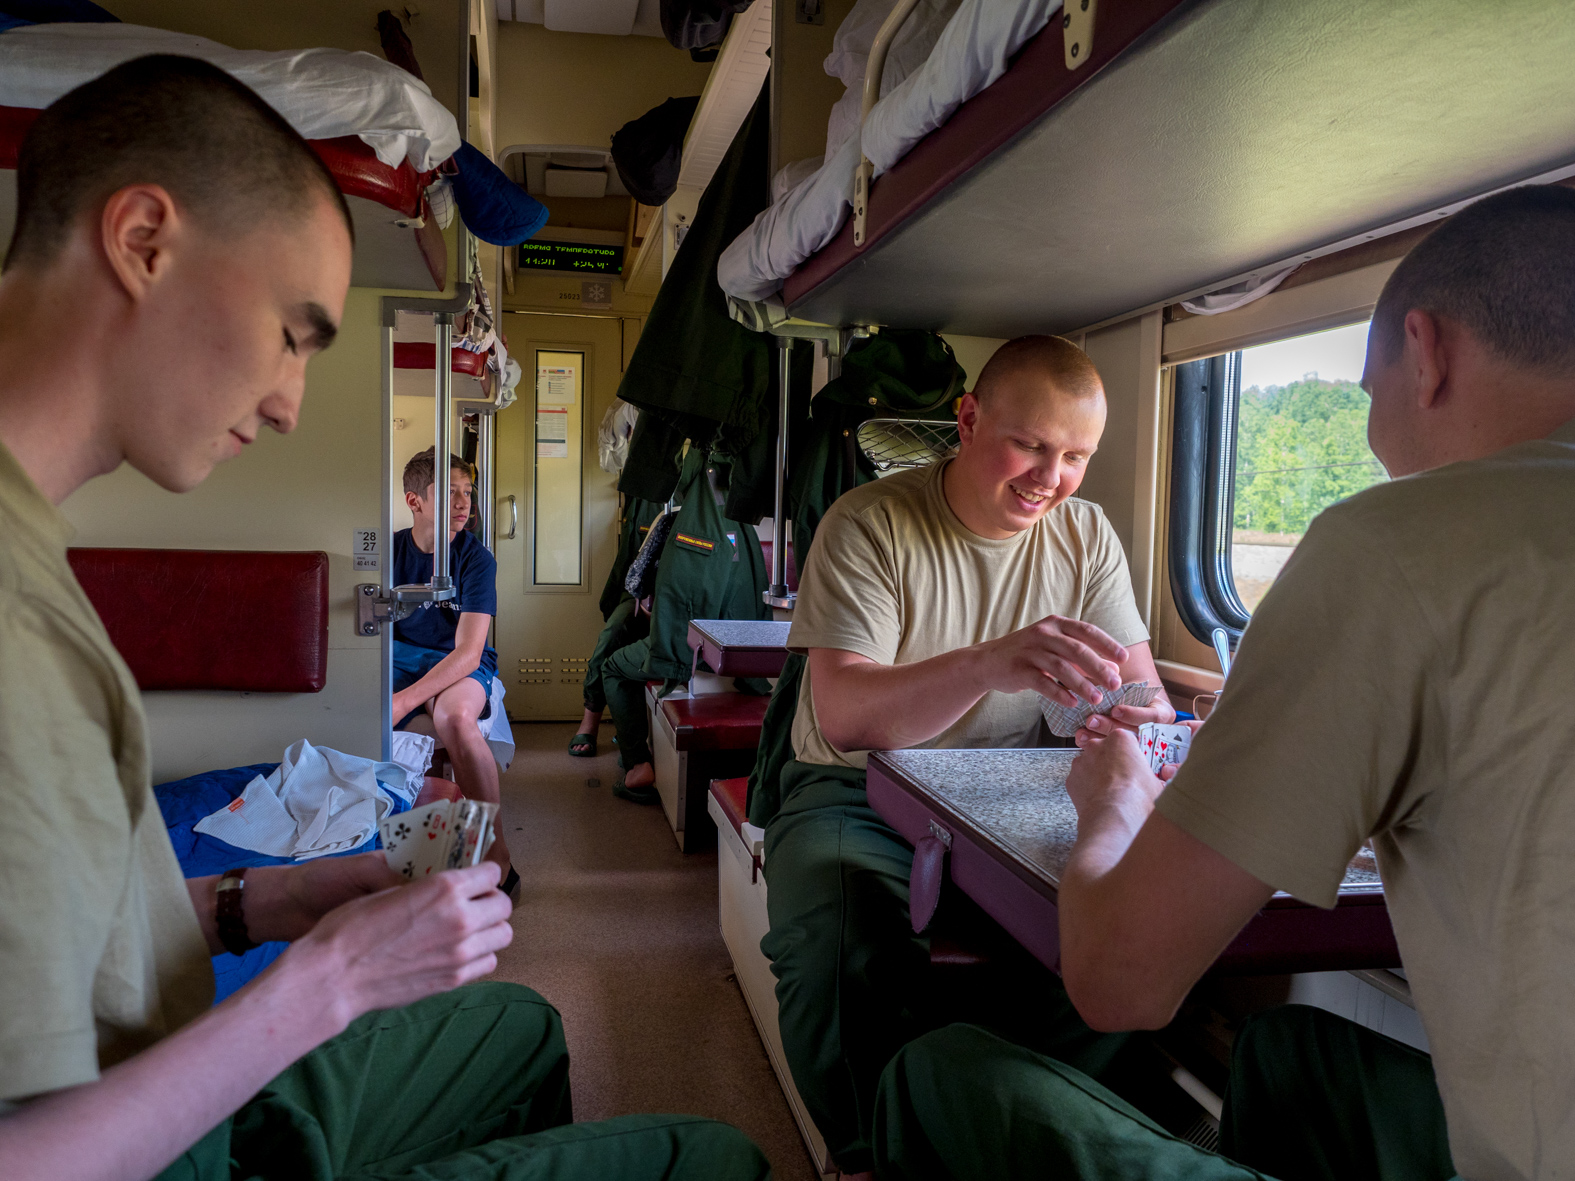 Army recruits play cards in a third class carriage on the Trans-Siberian Railway from Moscow-Vladivostok. Spanning a length of 9,289km, it's the longest uninterrupted single country train journey in the world. It has connected Moscow with Vladivostok since 1916, and is still being expanded. It was built between 1891 and 1916 under the supervision of Russian government ministers personally appointed by Tsar Alexander III and his son, the Tsarevich Nicholas (later Tsar Nicholas II).